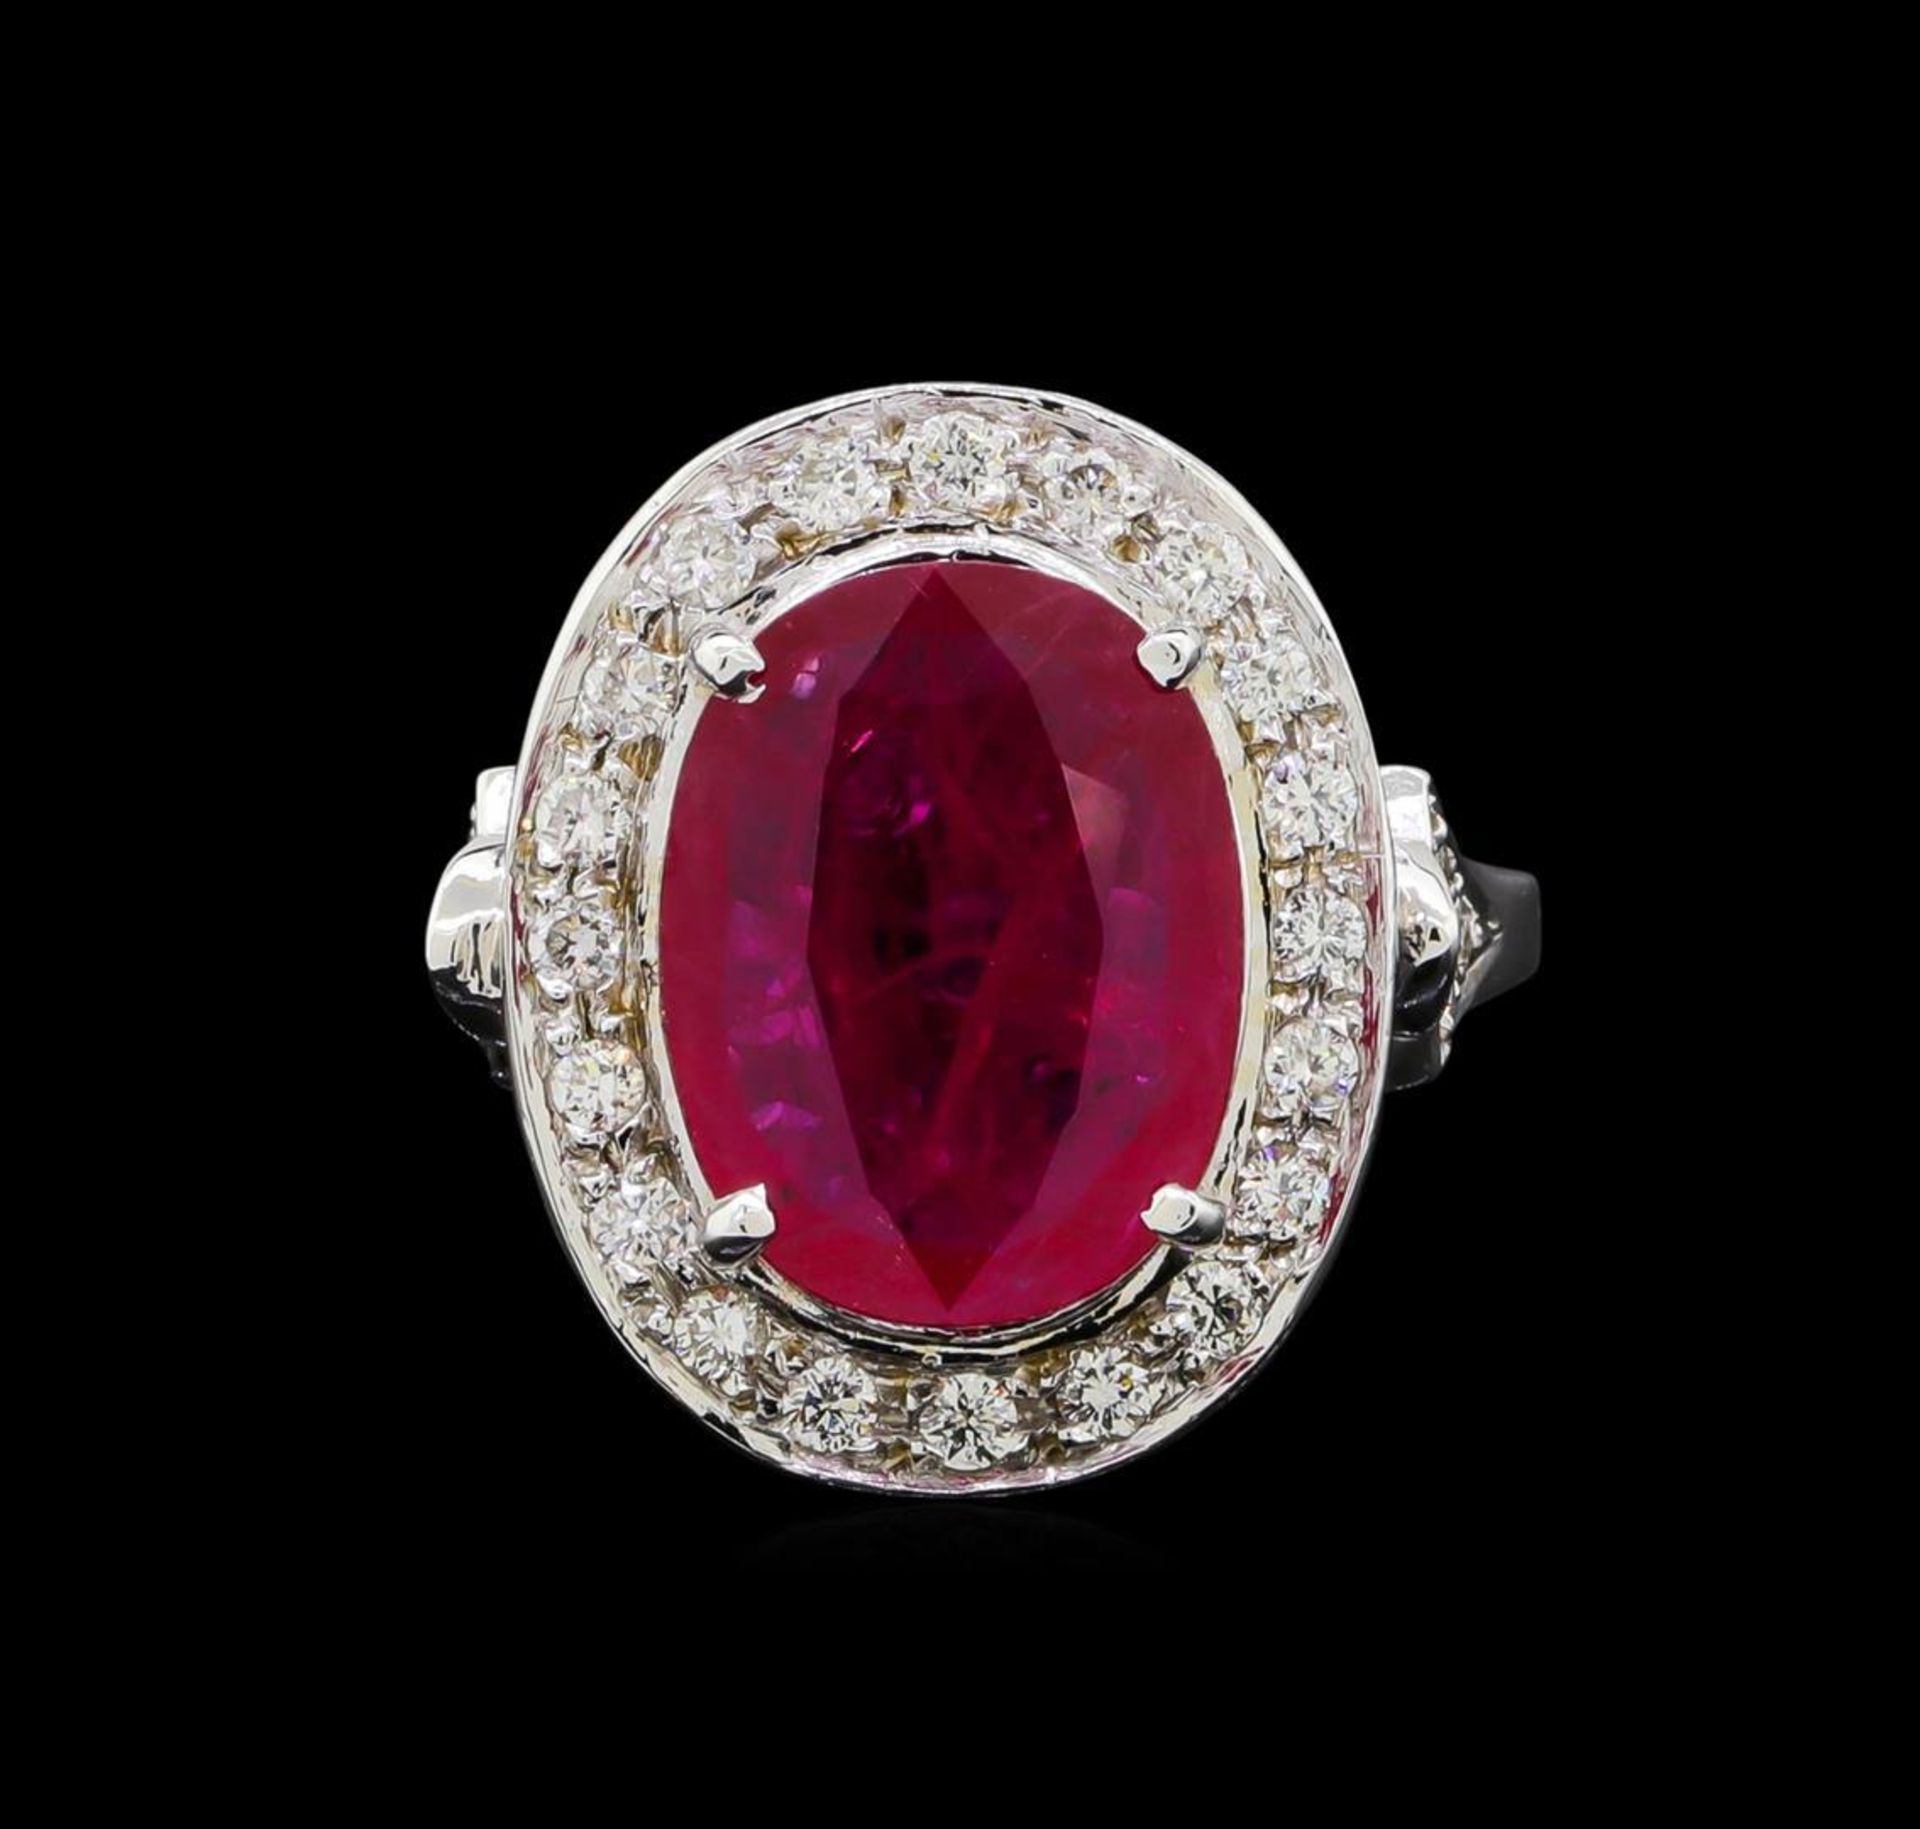 GIA Cert 4.07 ctw Ruby and Diamond Ring - 14KT White Gold - Image 2 of 6